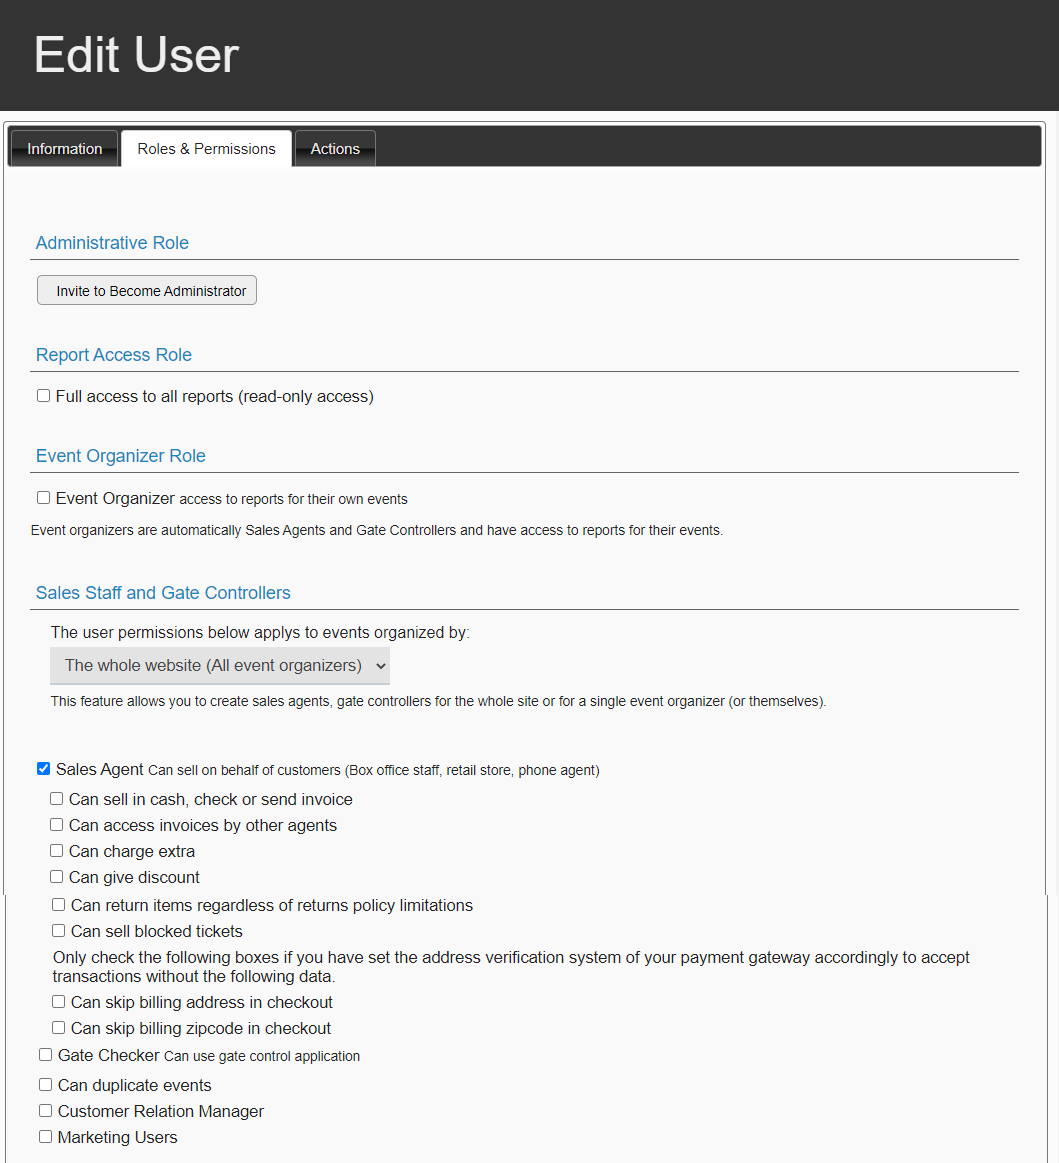 Setting Up the Sales Staff User Role and Permissions